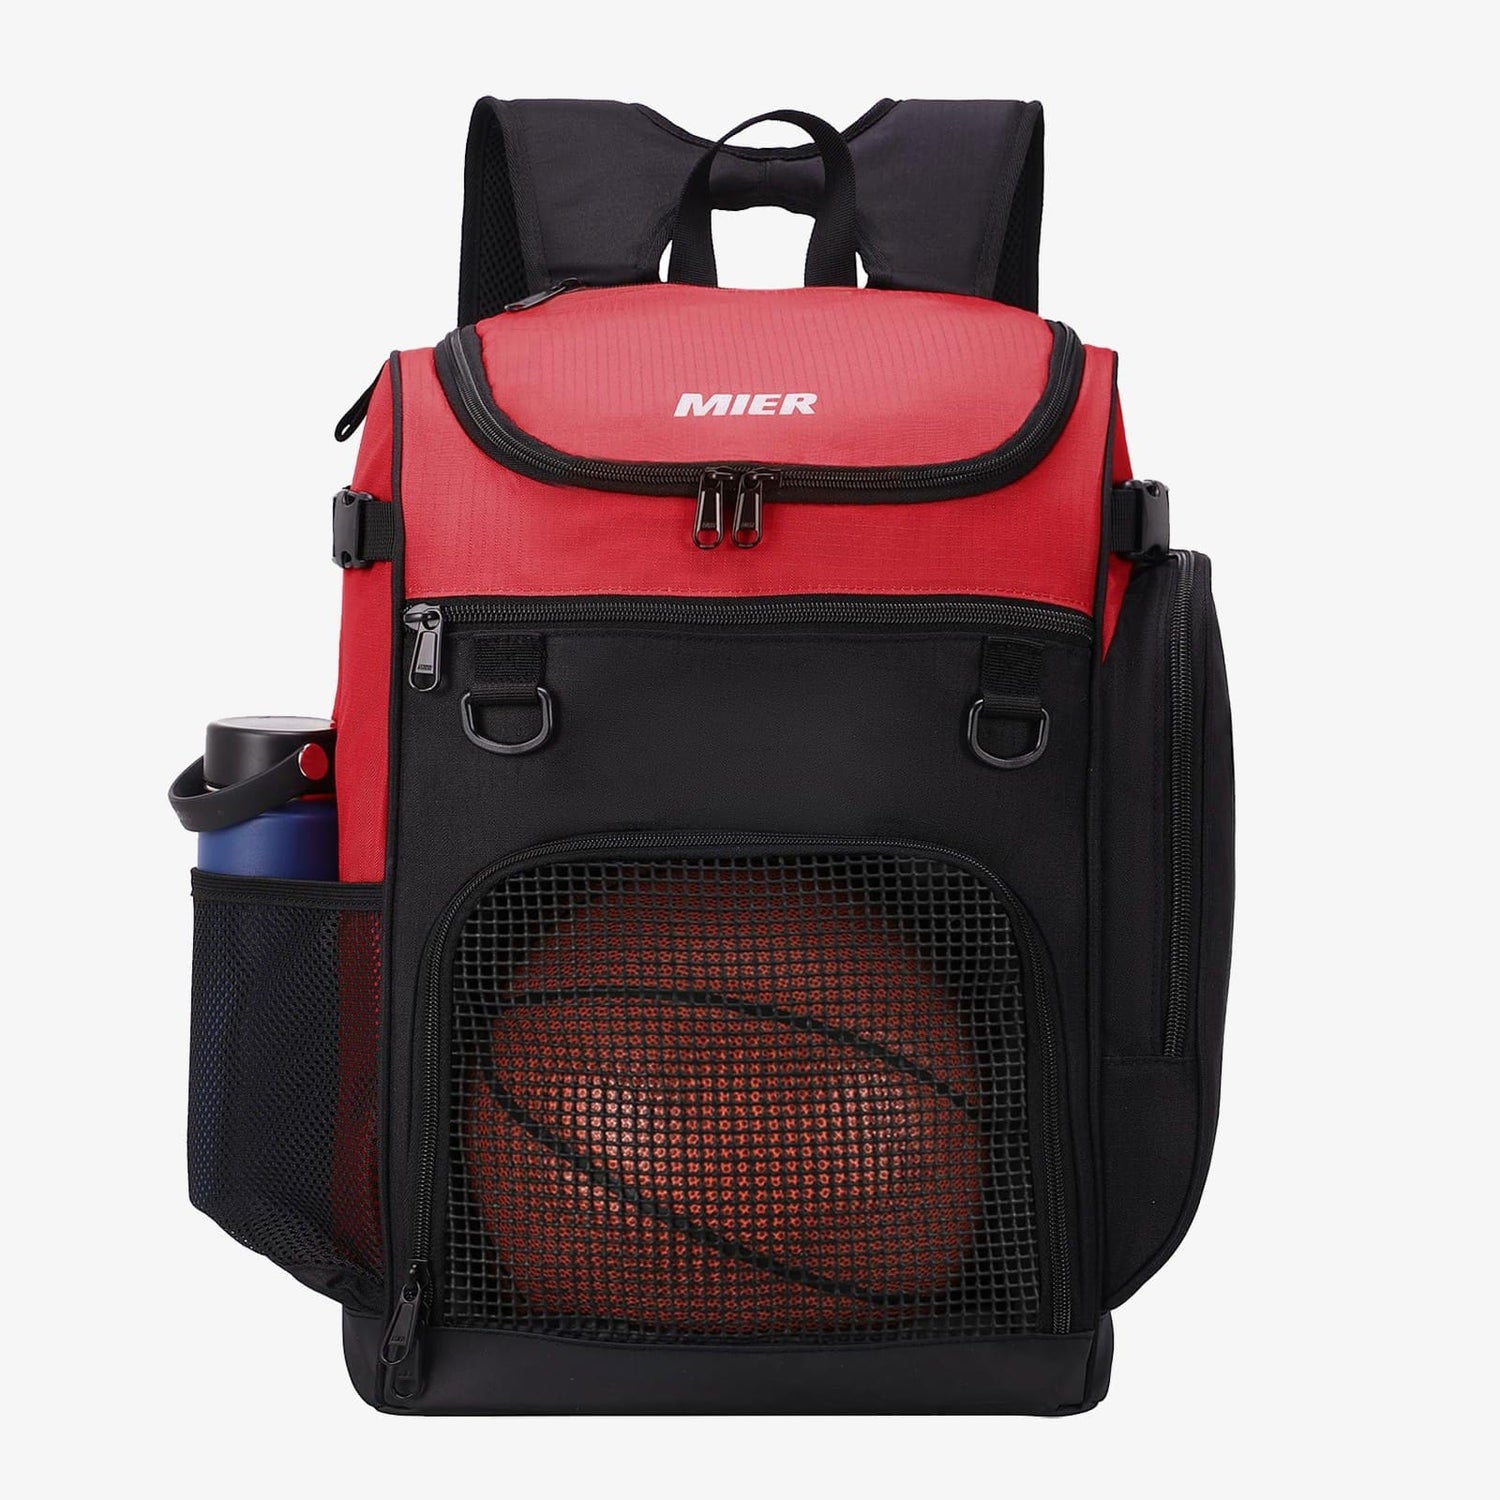 Large Basketball Backpack Sports Bag with Ball Compartment Backpack Bag Red Black / 40L MIER